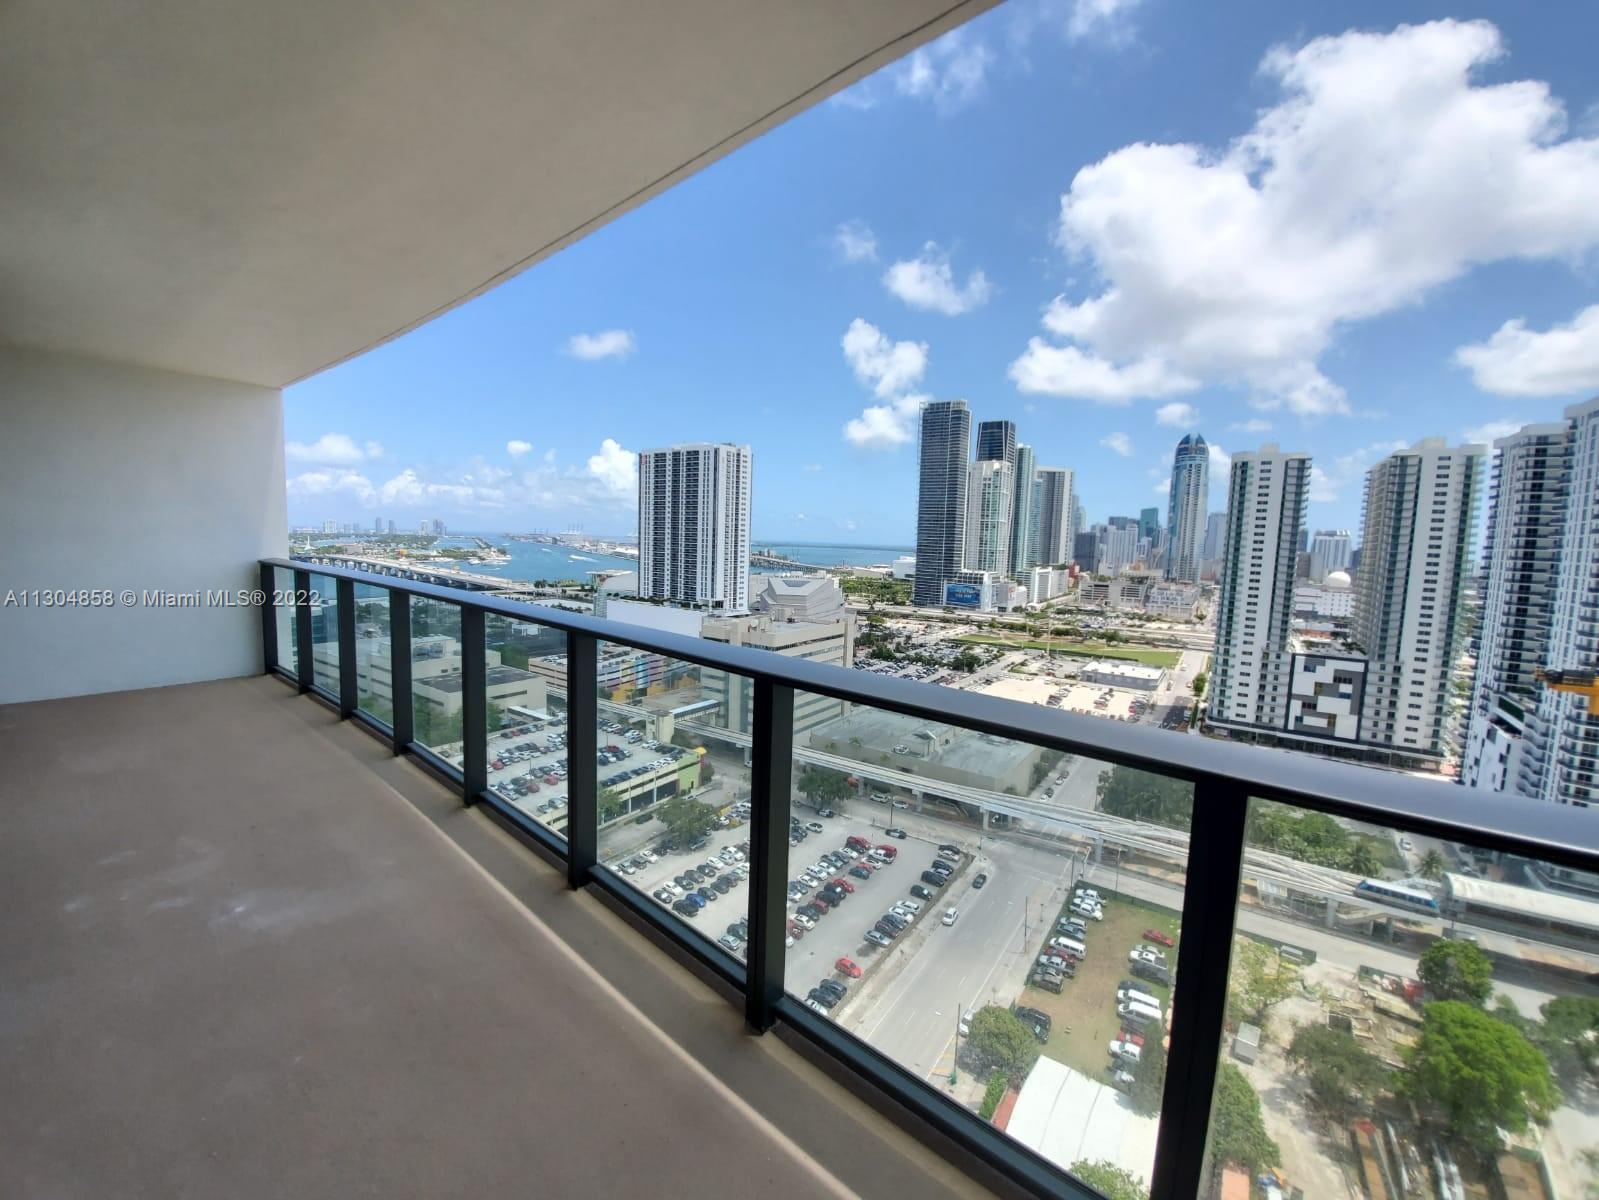 Extraordinary New 2BR/2BA Apartment with MIAMI Skyline Views on EXCLUSIVE "CANVAS".
Local transport